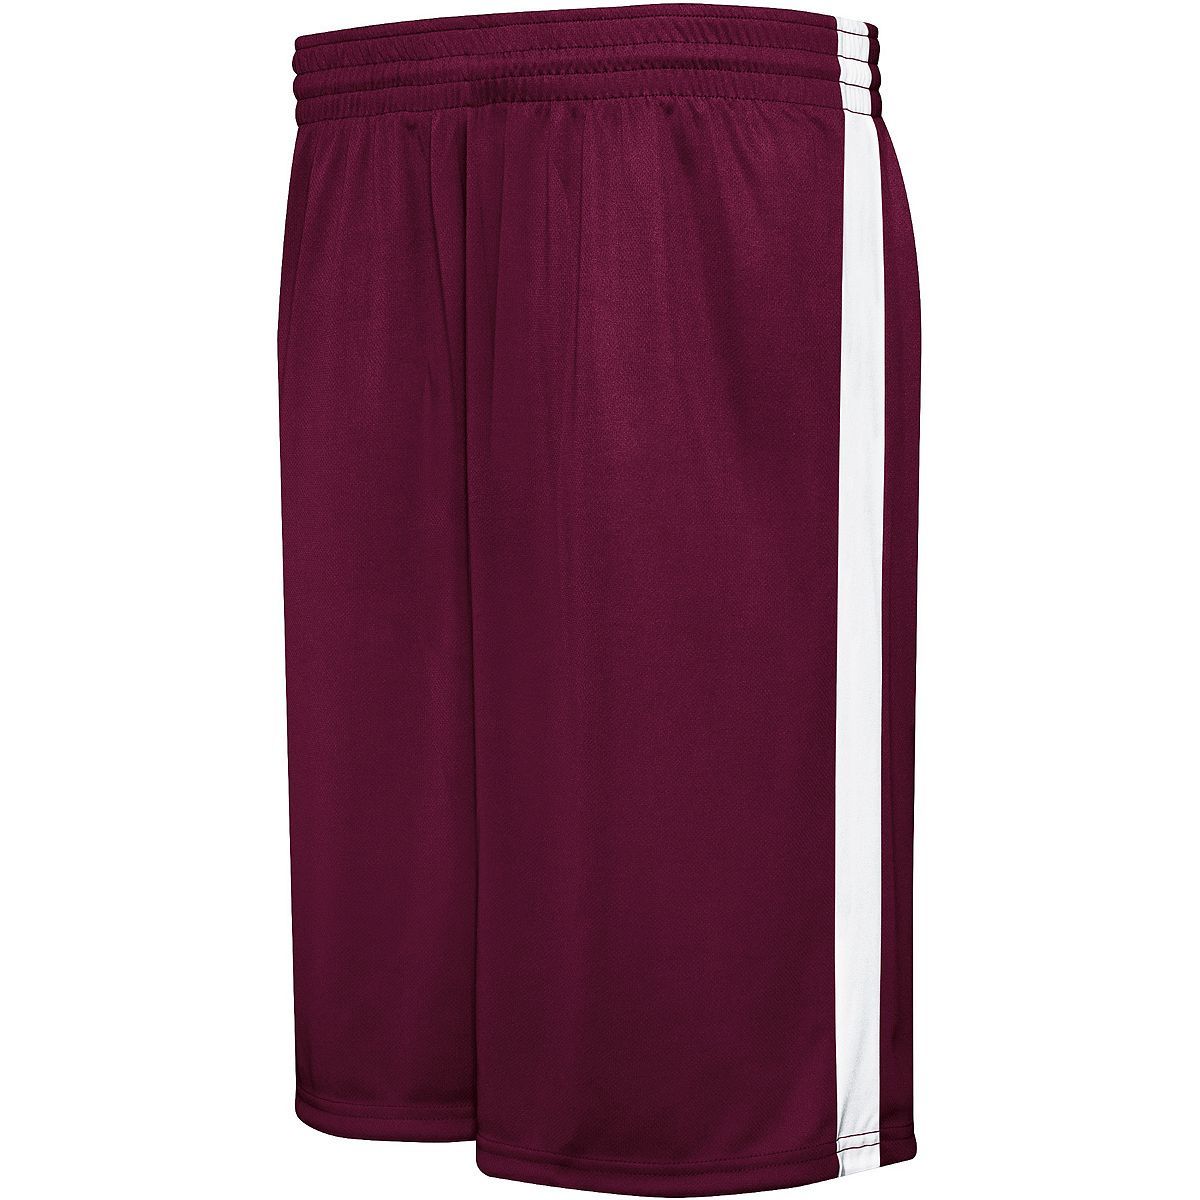 Augusta Sportswear Competition Reversible Shorts in Maroon/White  -Part of the Adult, Adult-Shorts, Augusta-Products, Basketball, All-Sports, All-Sports-1 product lines at KanaleyCreations.com